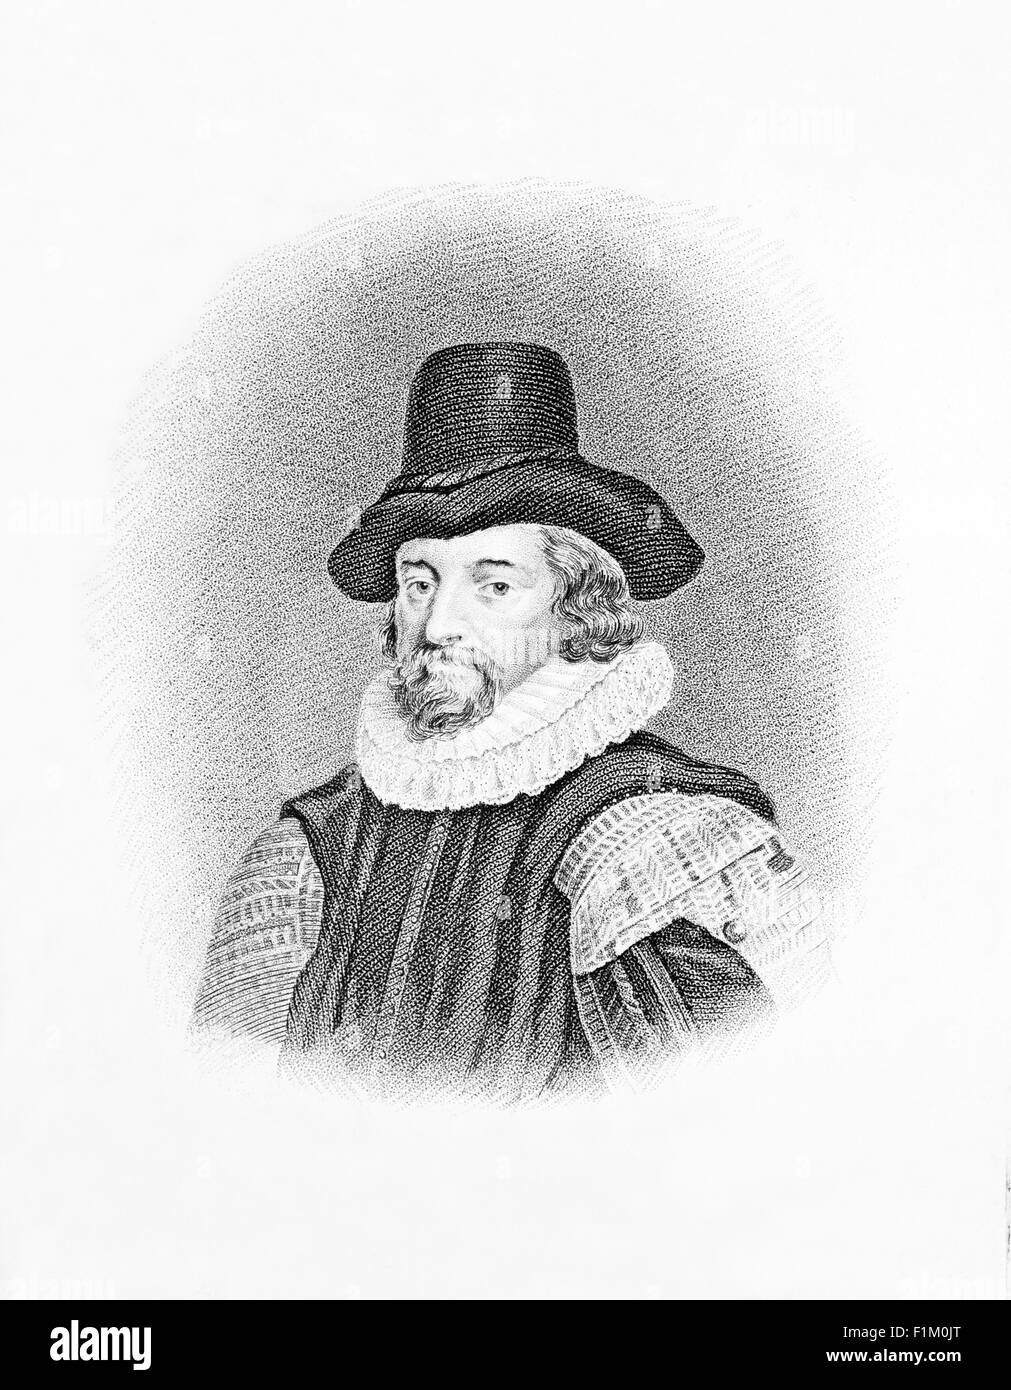 A 19th century portrait of Francis Bacon (1561-1626), also known as Lord Verulam. He was an English philosopher, statesman, scientist, jurist and author who served as Attorney General and as Lord Chancellor of England. His works are credited with developing the scientific method and remained influential through the scientific revolution. Stock Photo